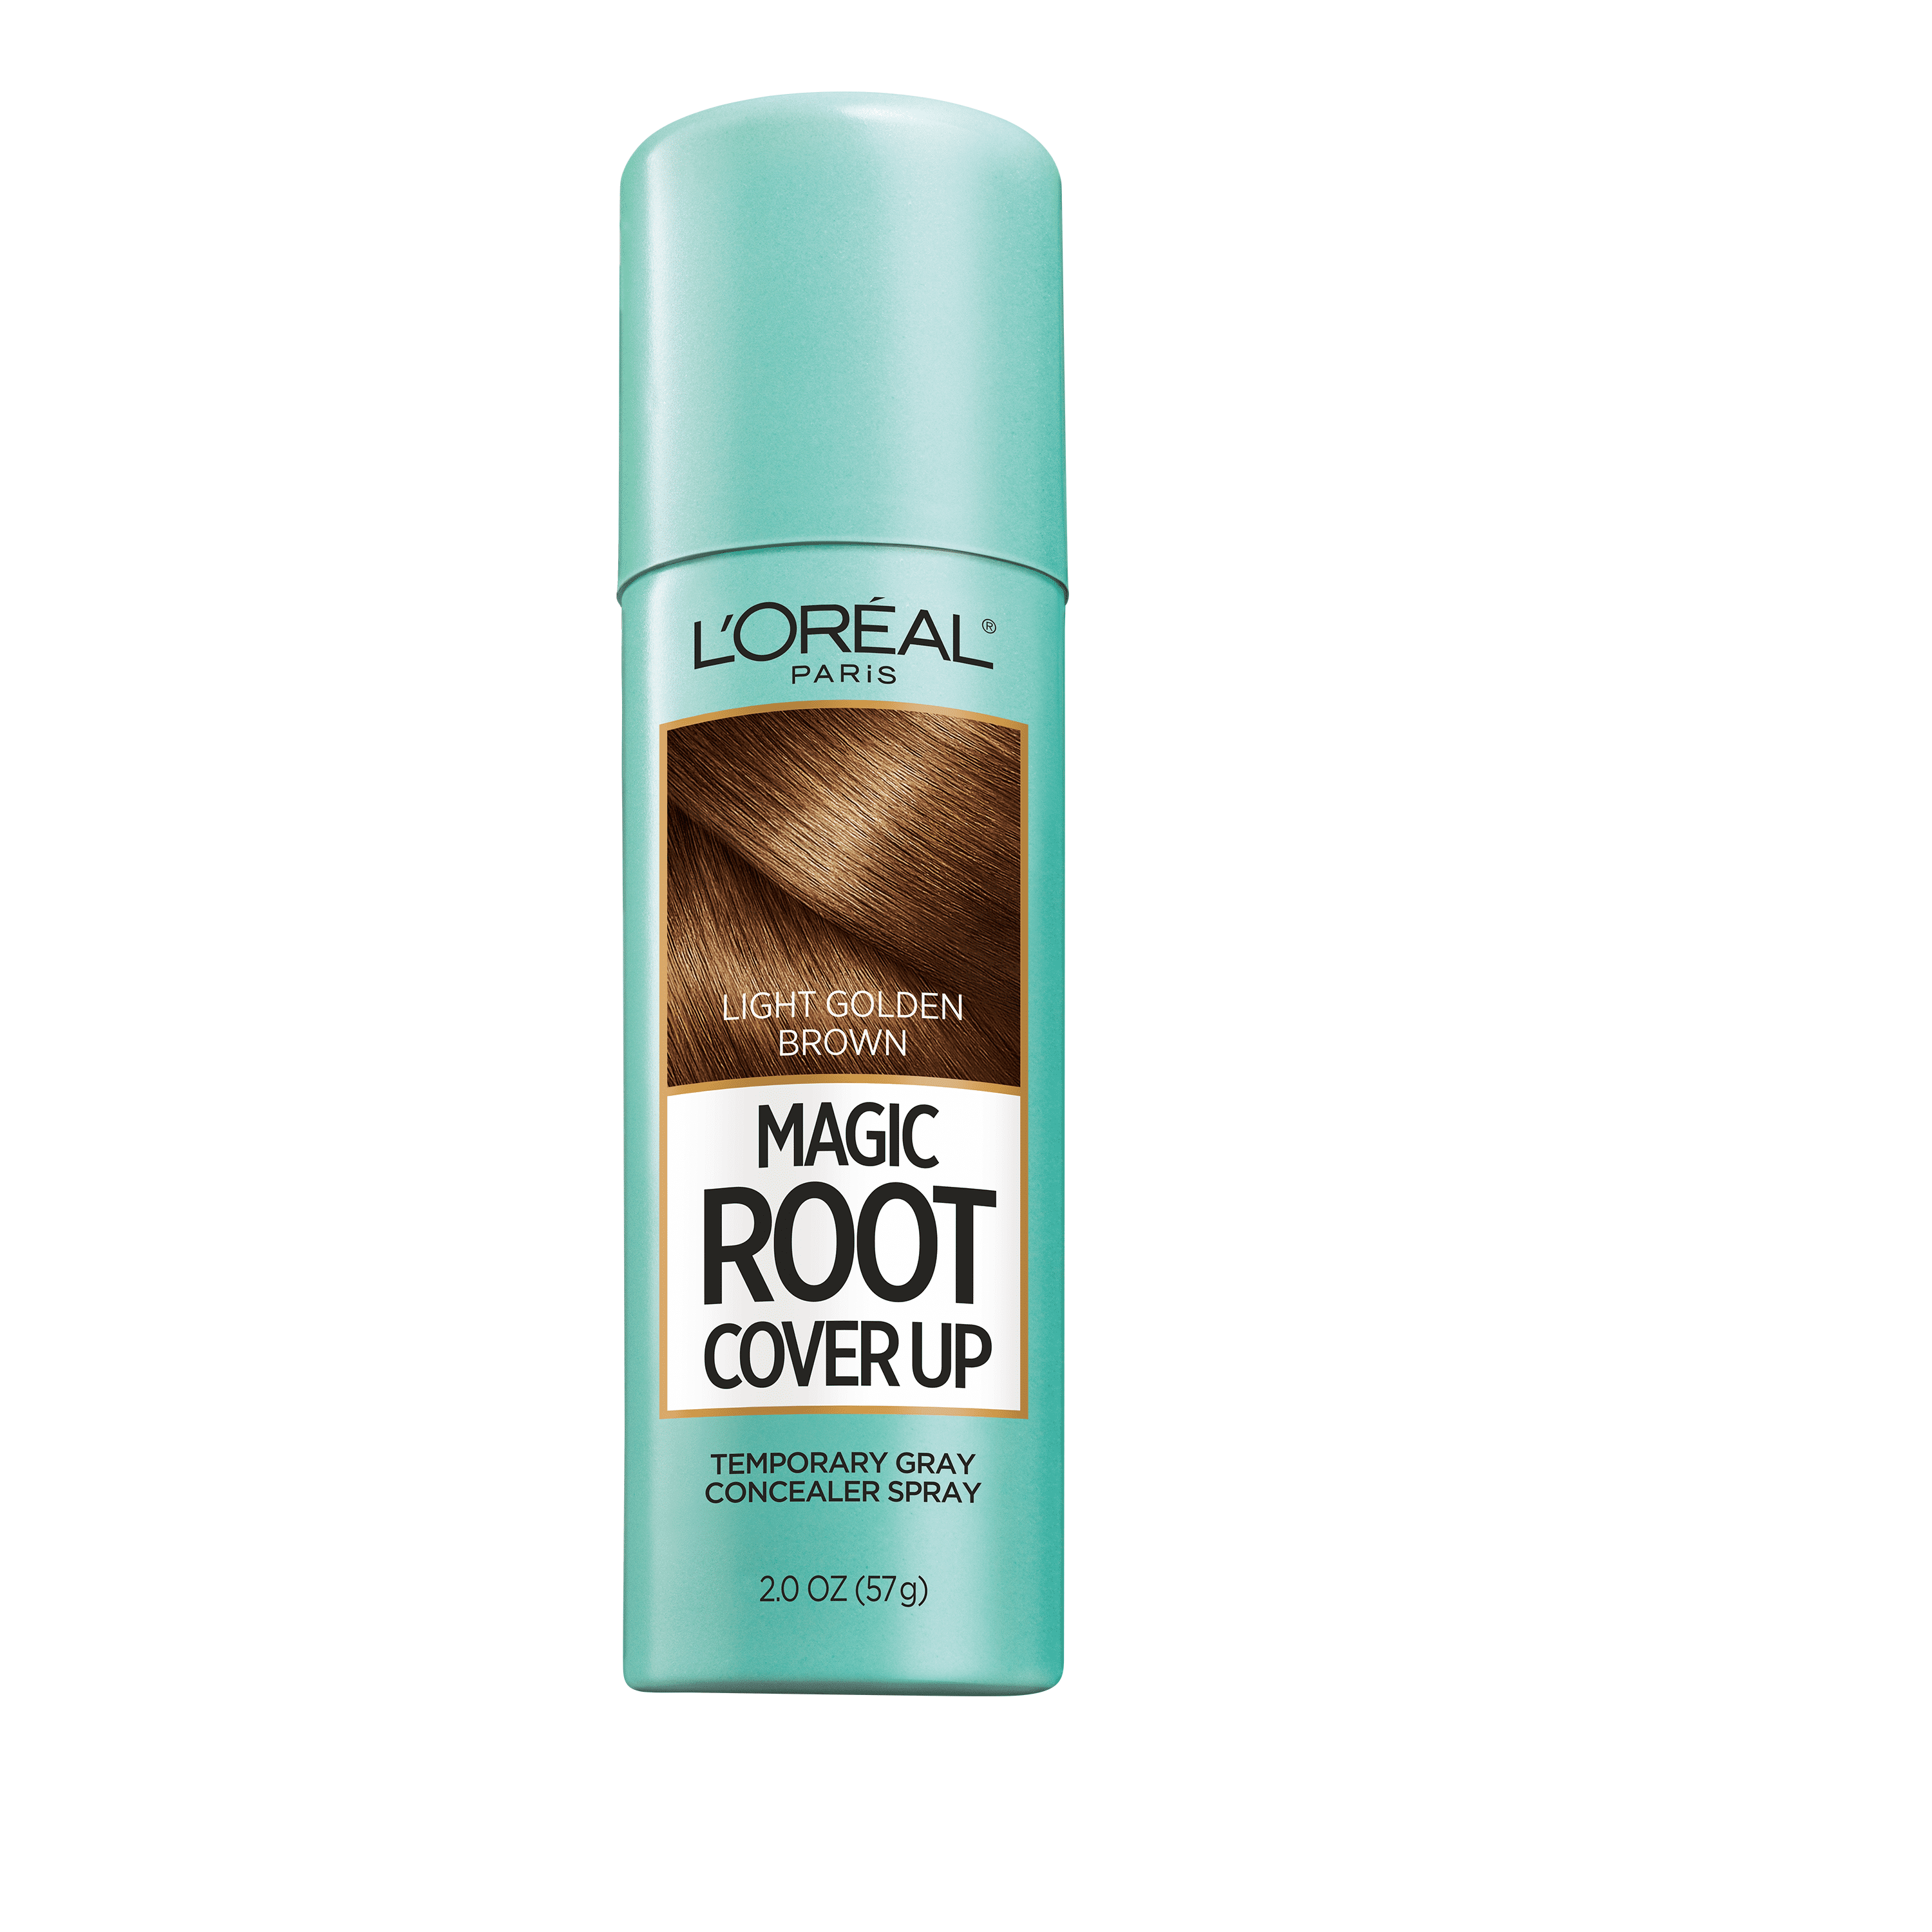 L'Oreal Paris Magic Root Cover Up Temporary Concealer Spray for Gray, Light  Brown, 2 oz 